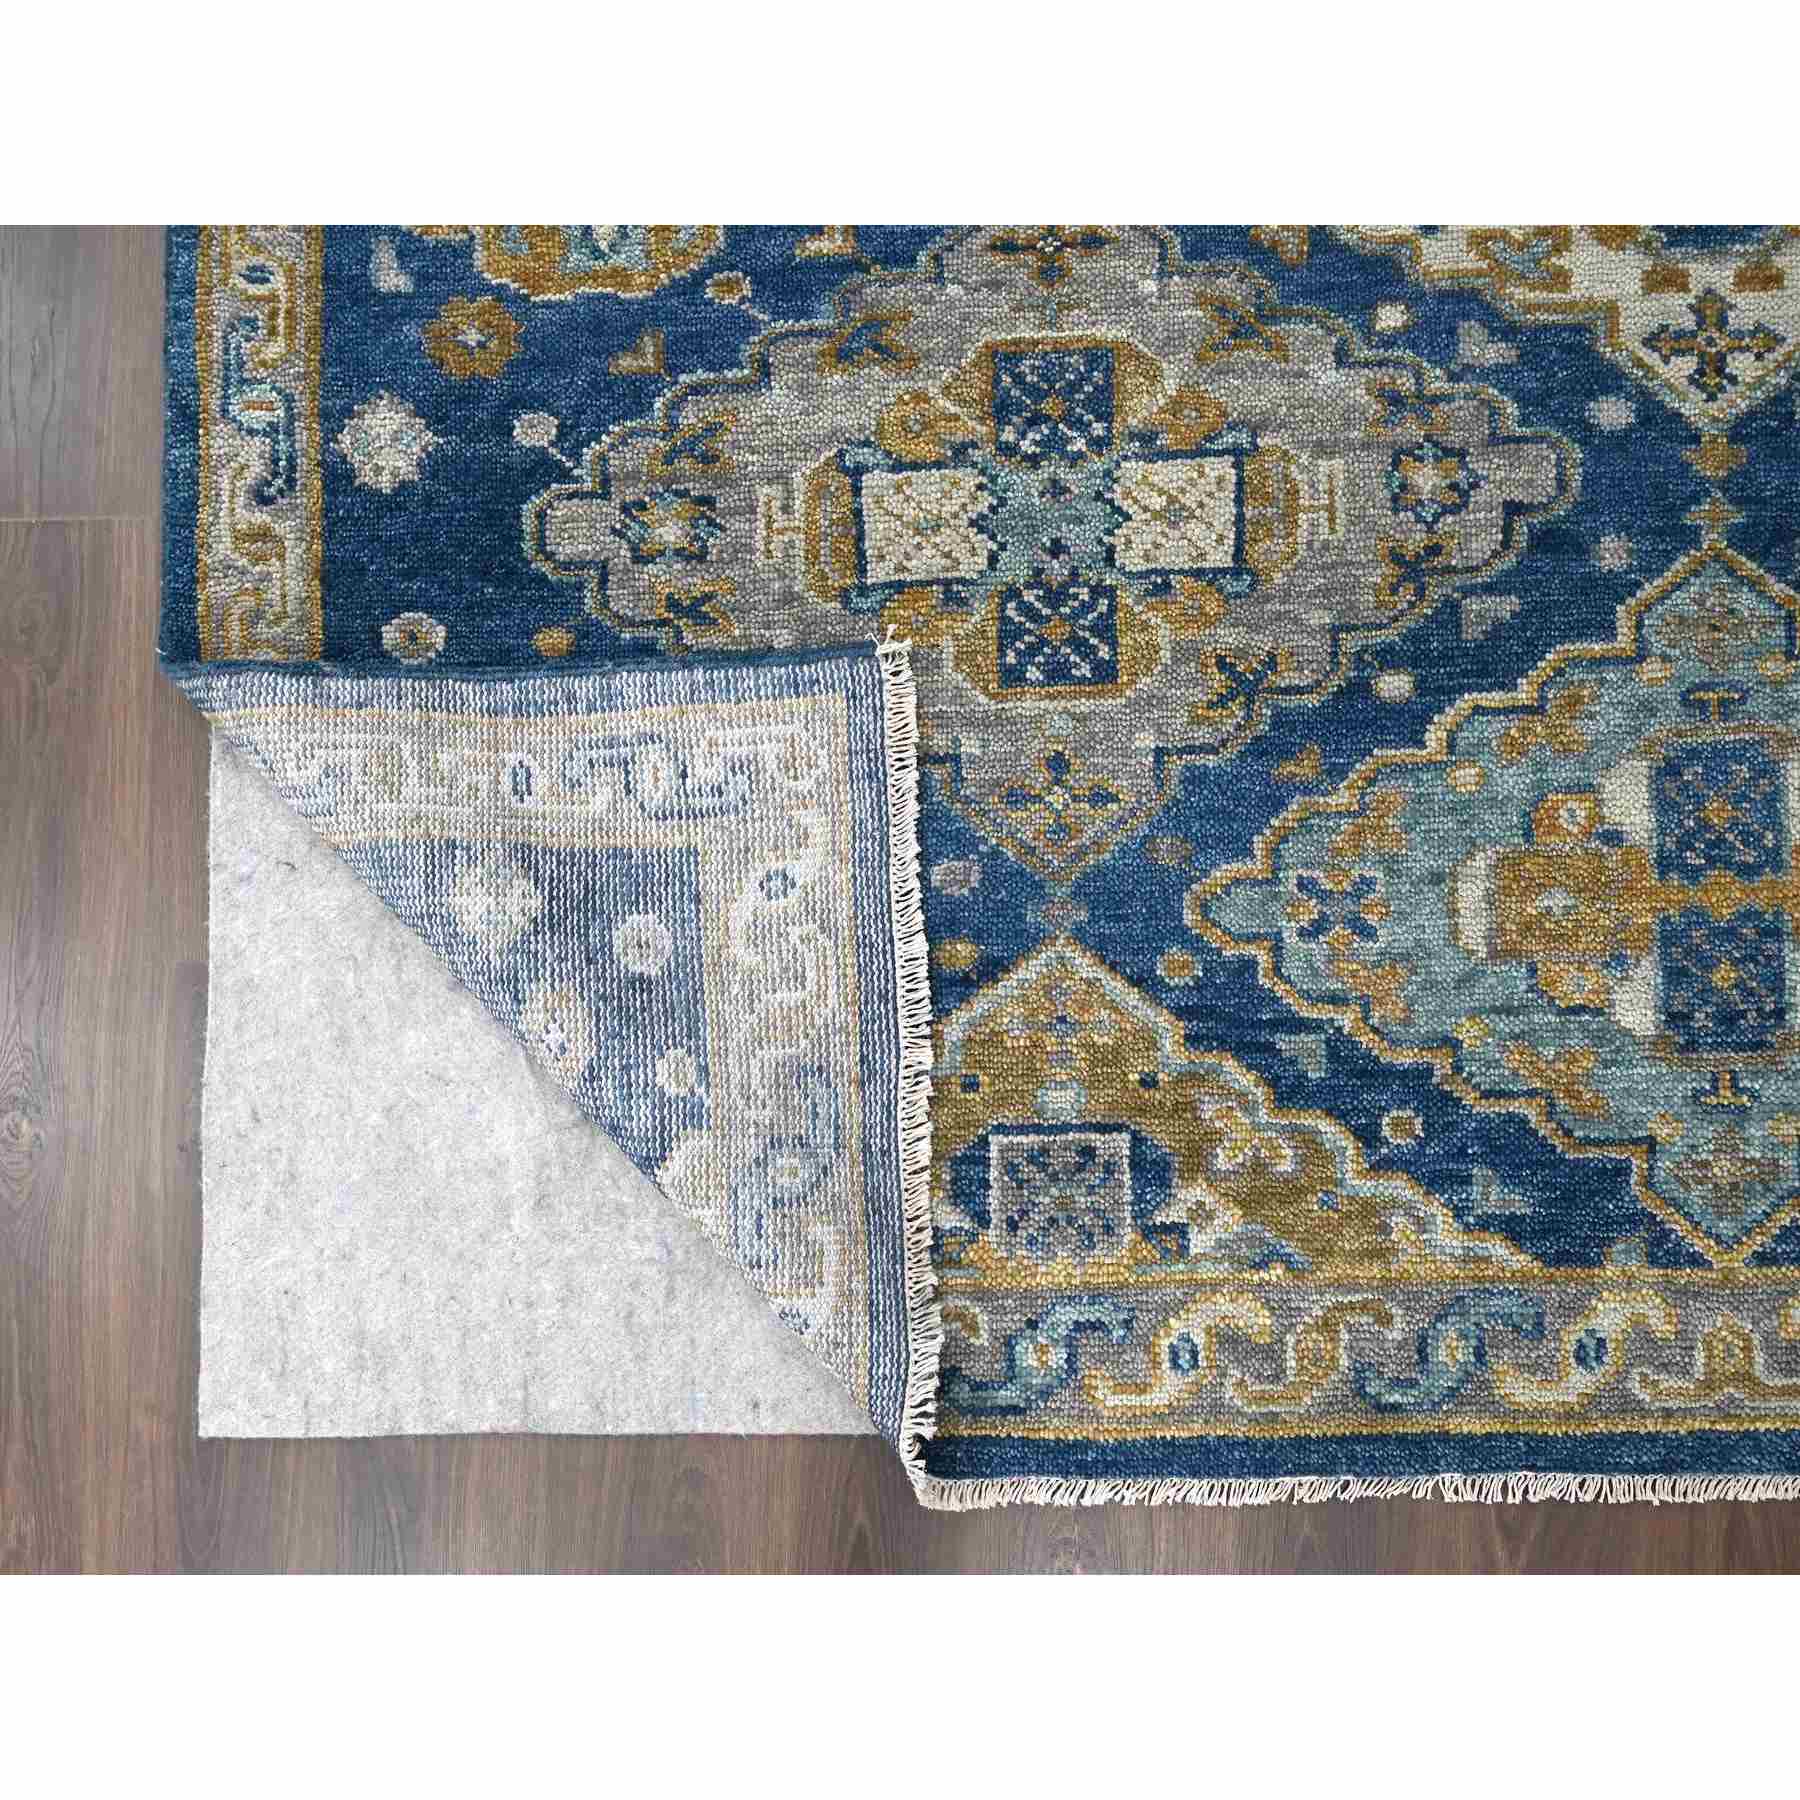 Transitional-Hand-Knotted-Rug-421235